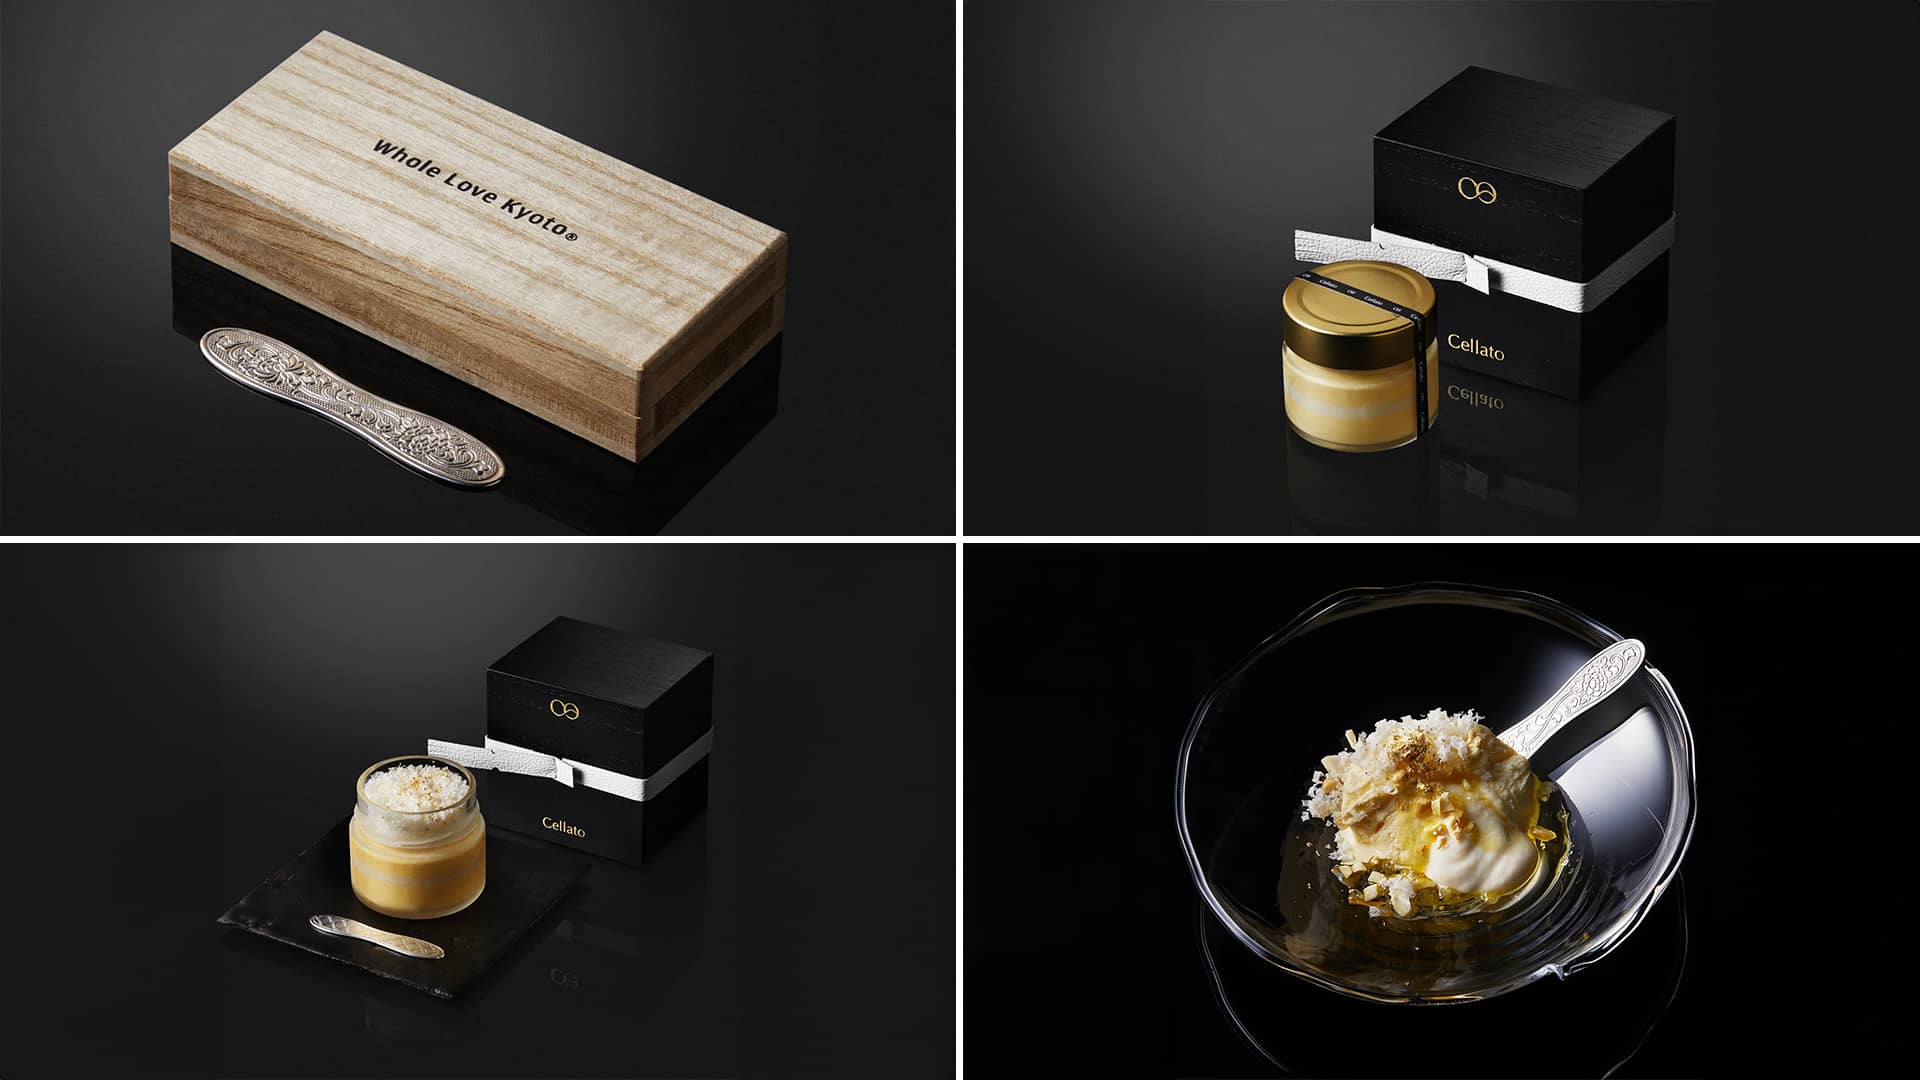 This $6,000 White-Truffle Ice Cream Is the Most Expensive in the